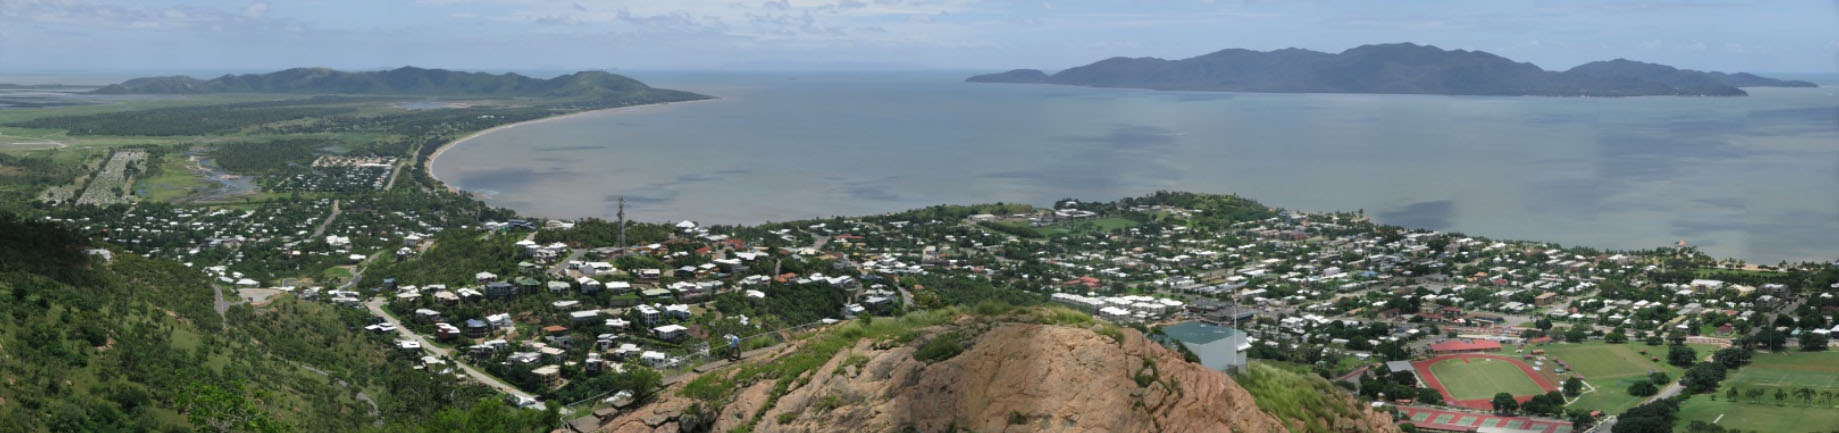 Townsville, Queensland, Australia from Castle Hill looking north